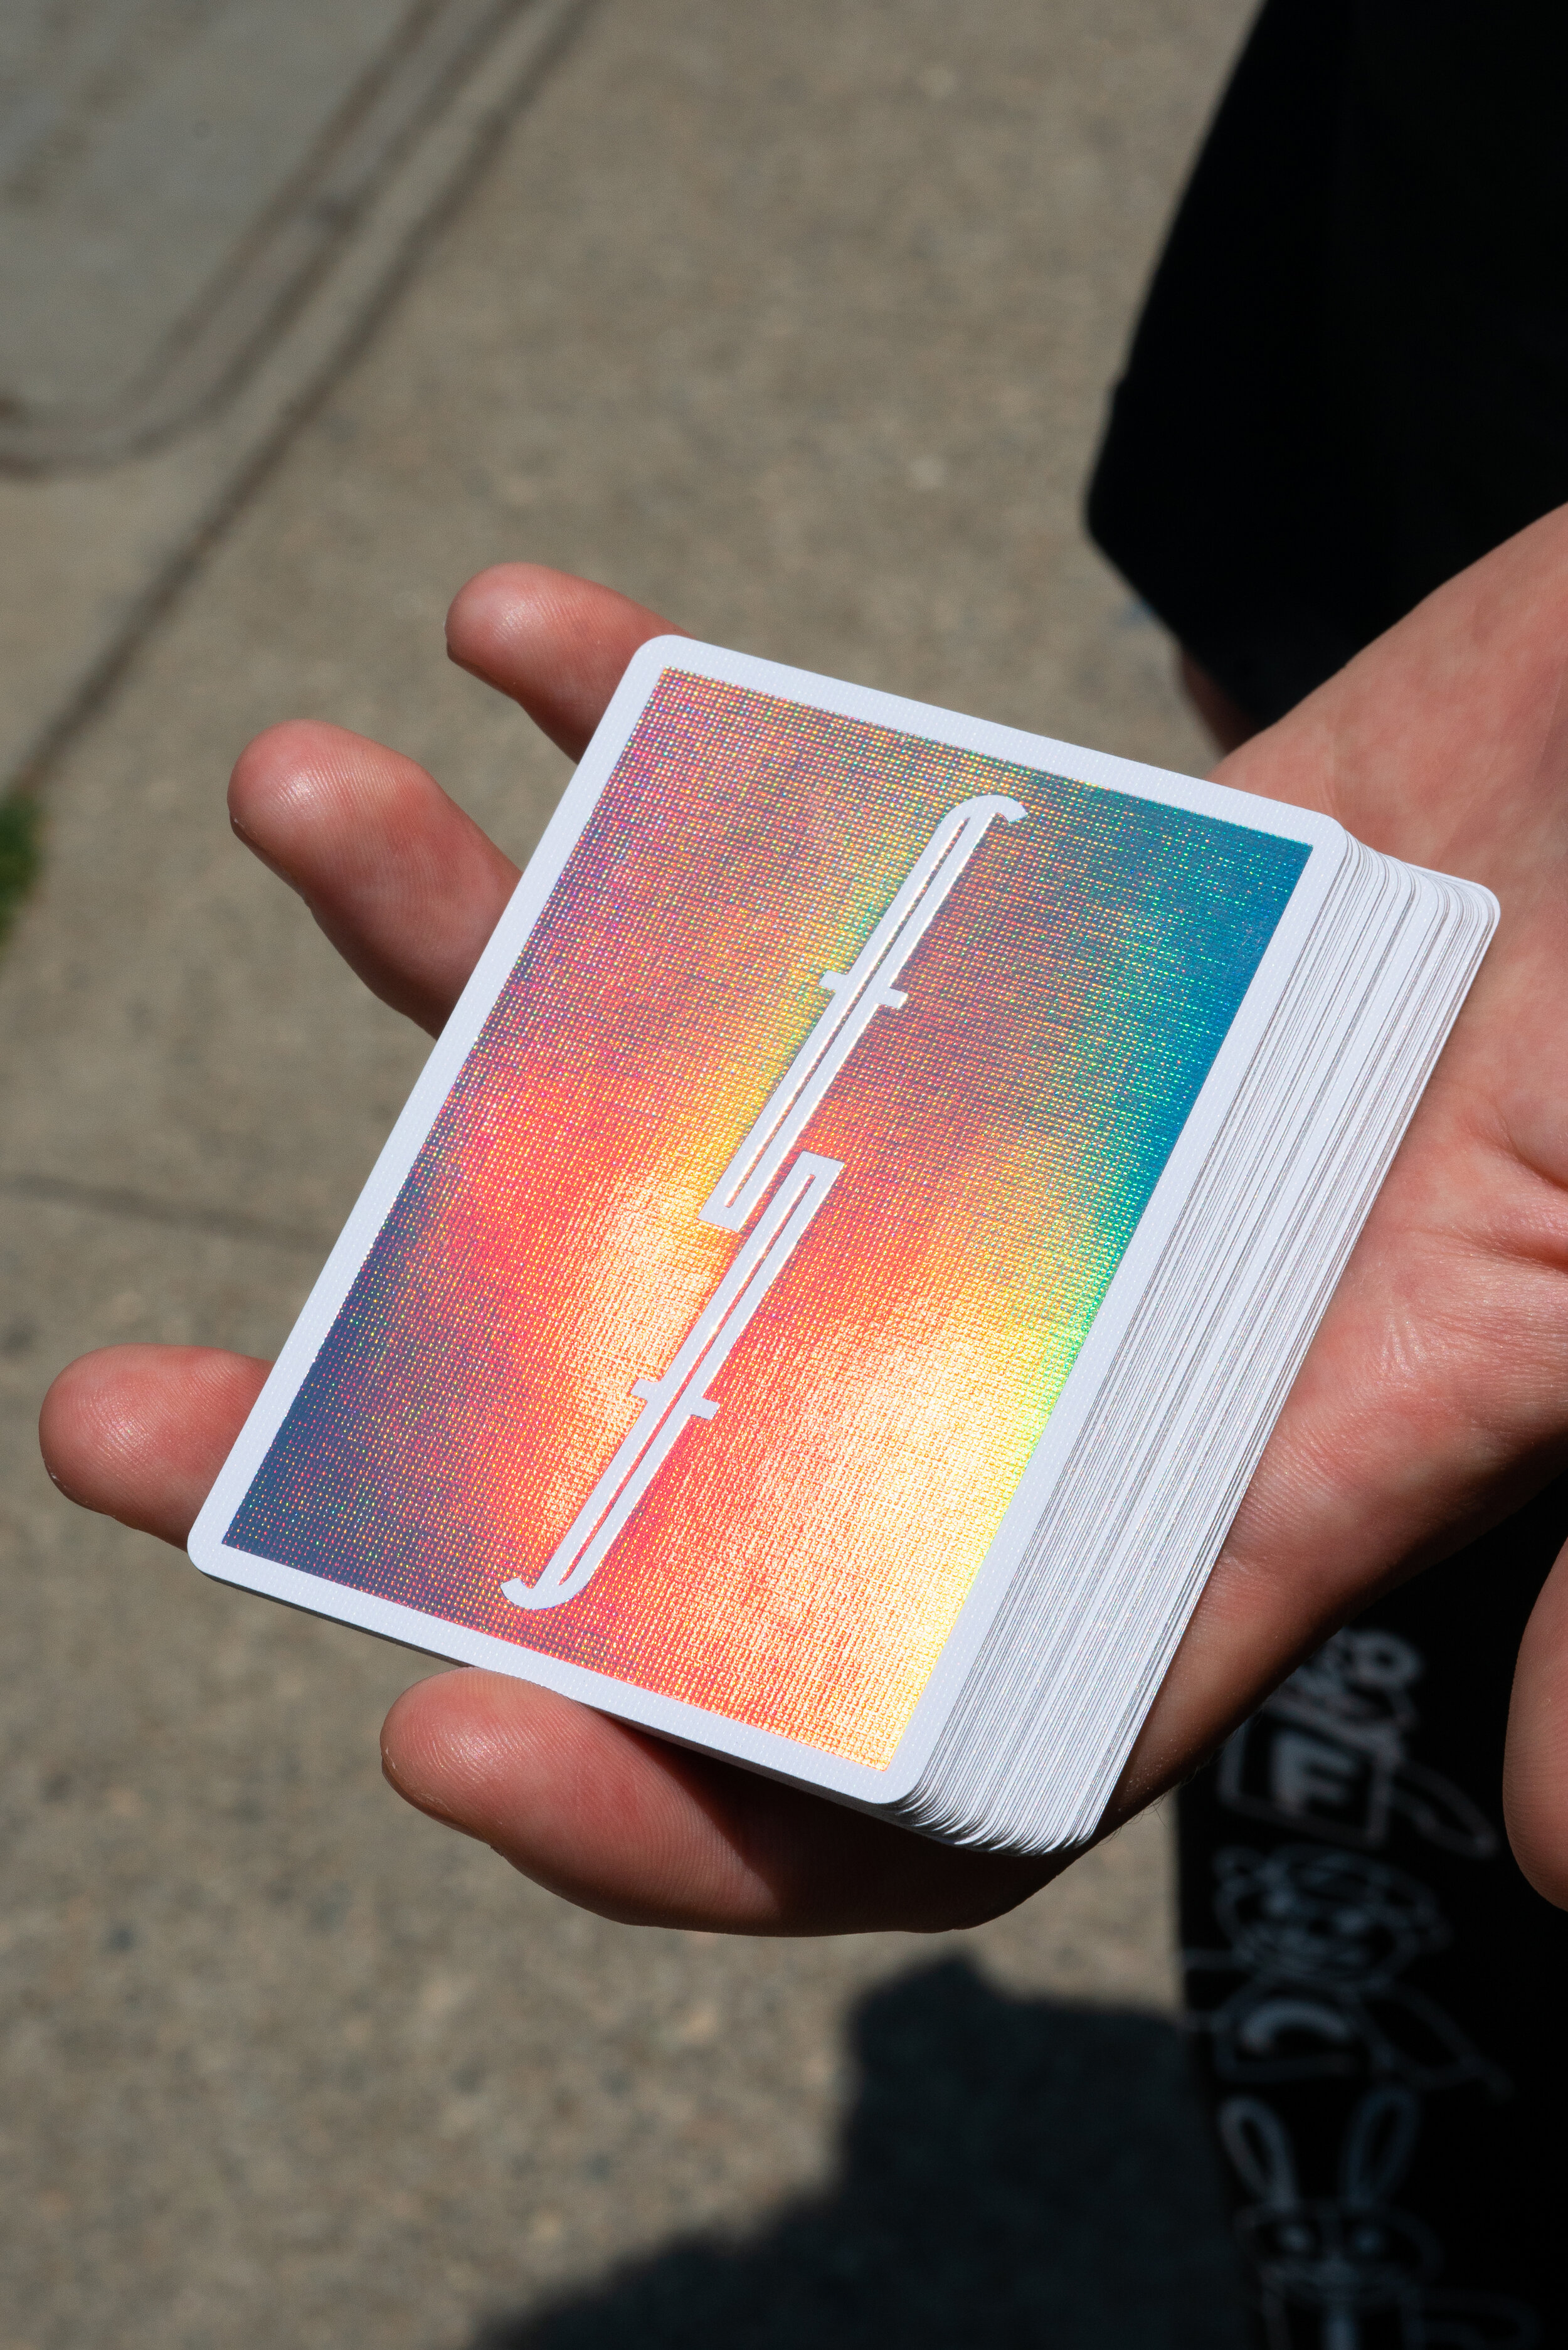 HOLOGRAPHIC FONTAINES — FONTAINE CARDS